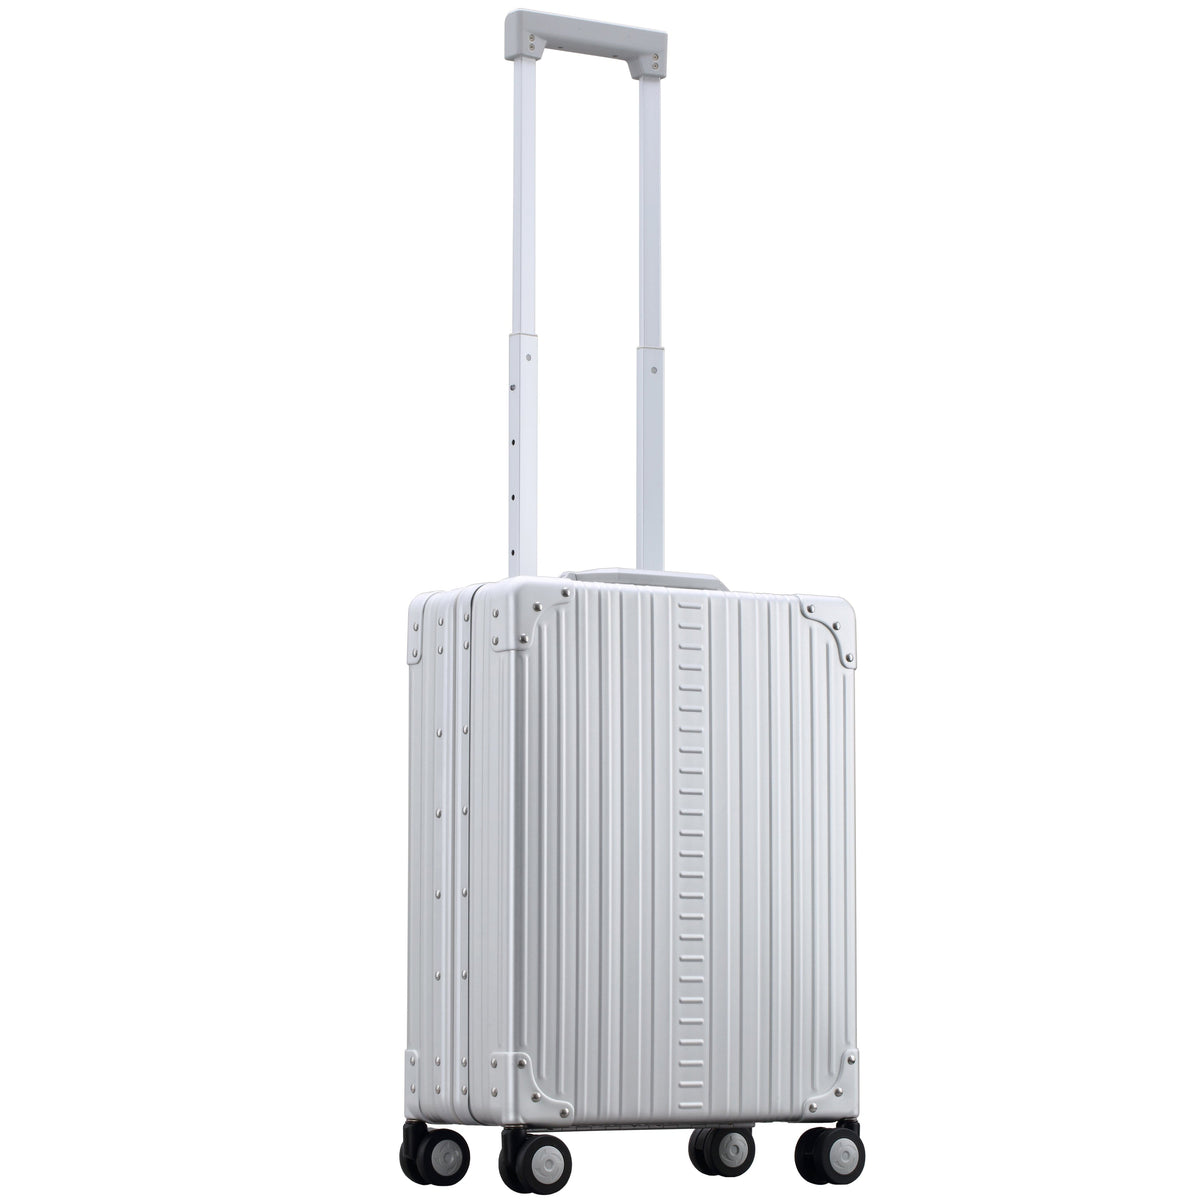 Aleon 21" Vertical Overnight Business Carry-On Luggage